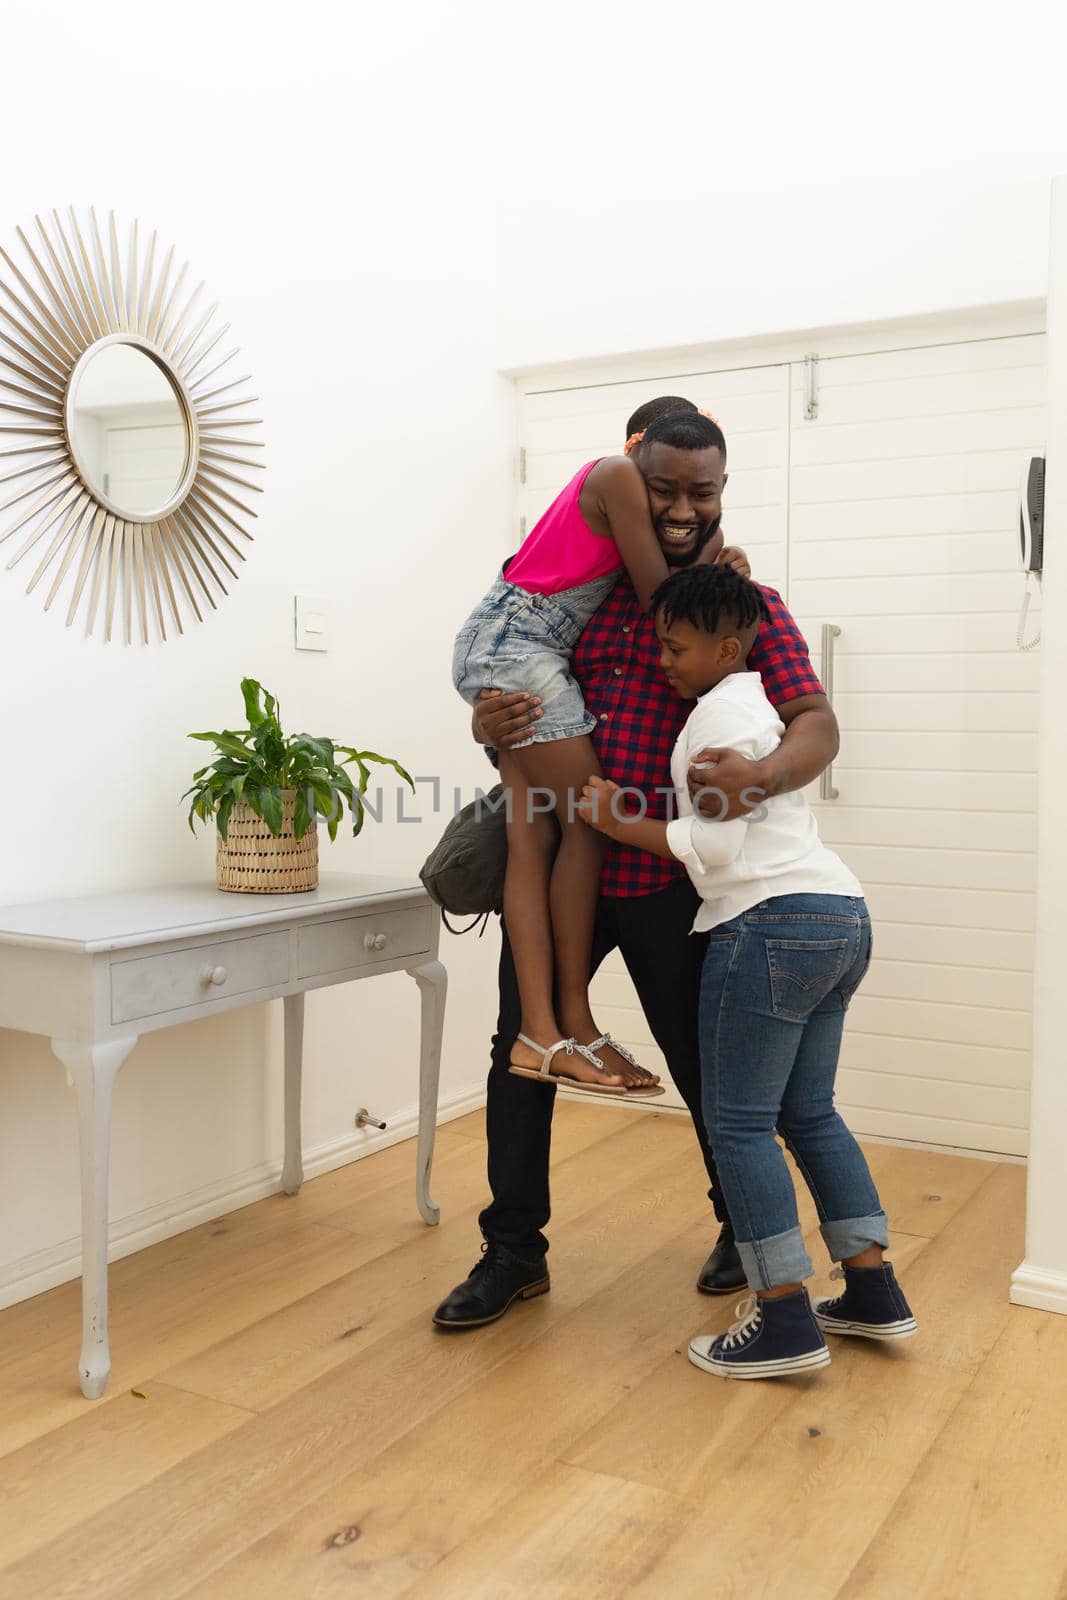 Smiling african american father returning home embracing son and daughter in hallway. happy family at home together.